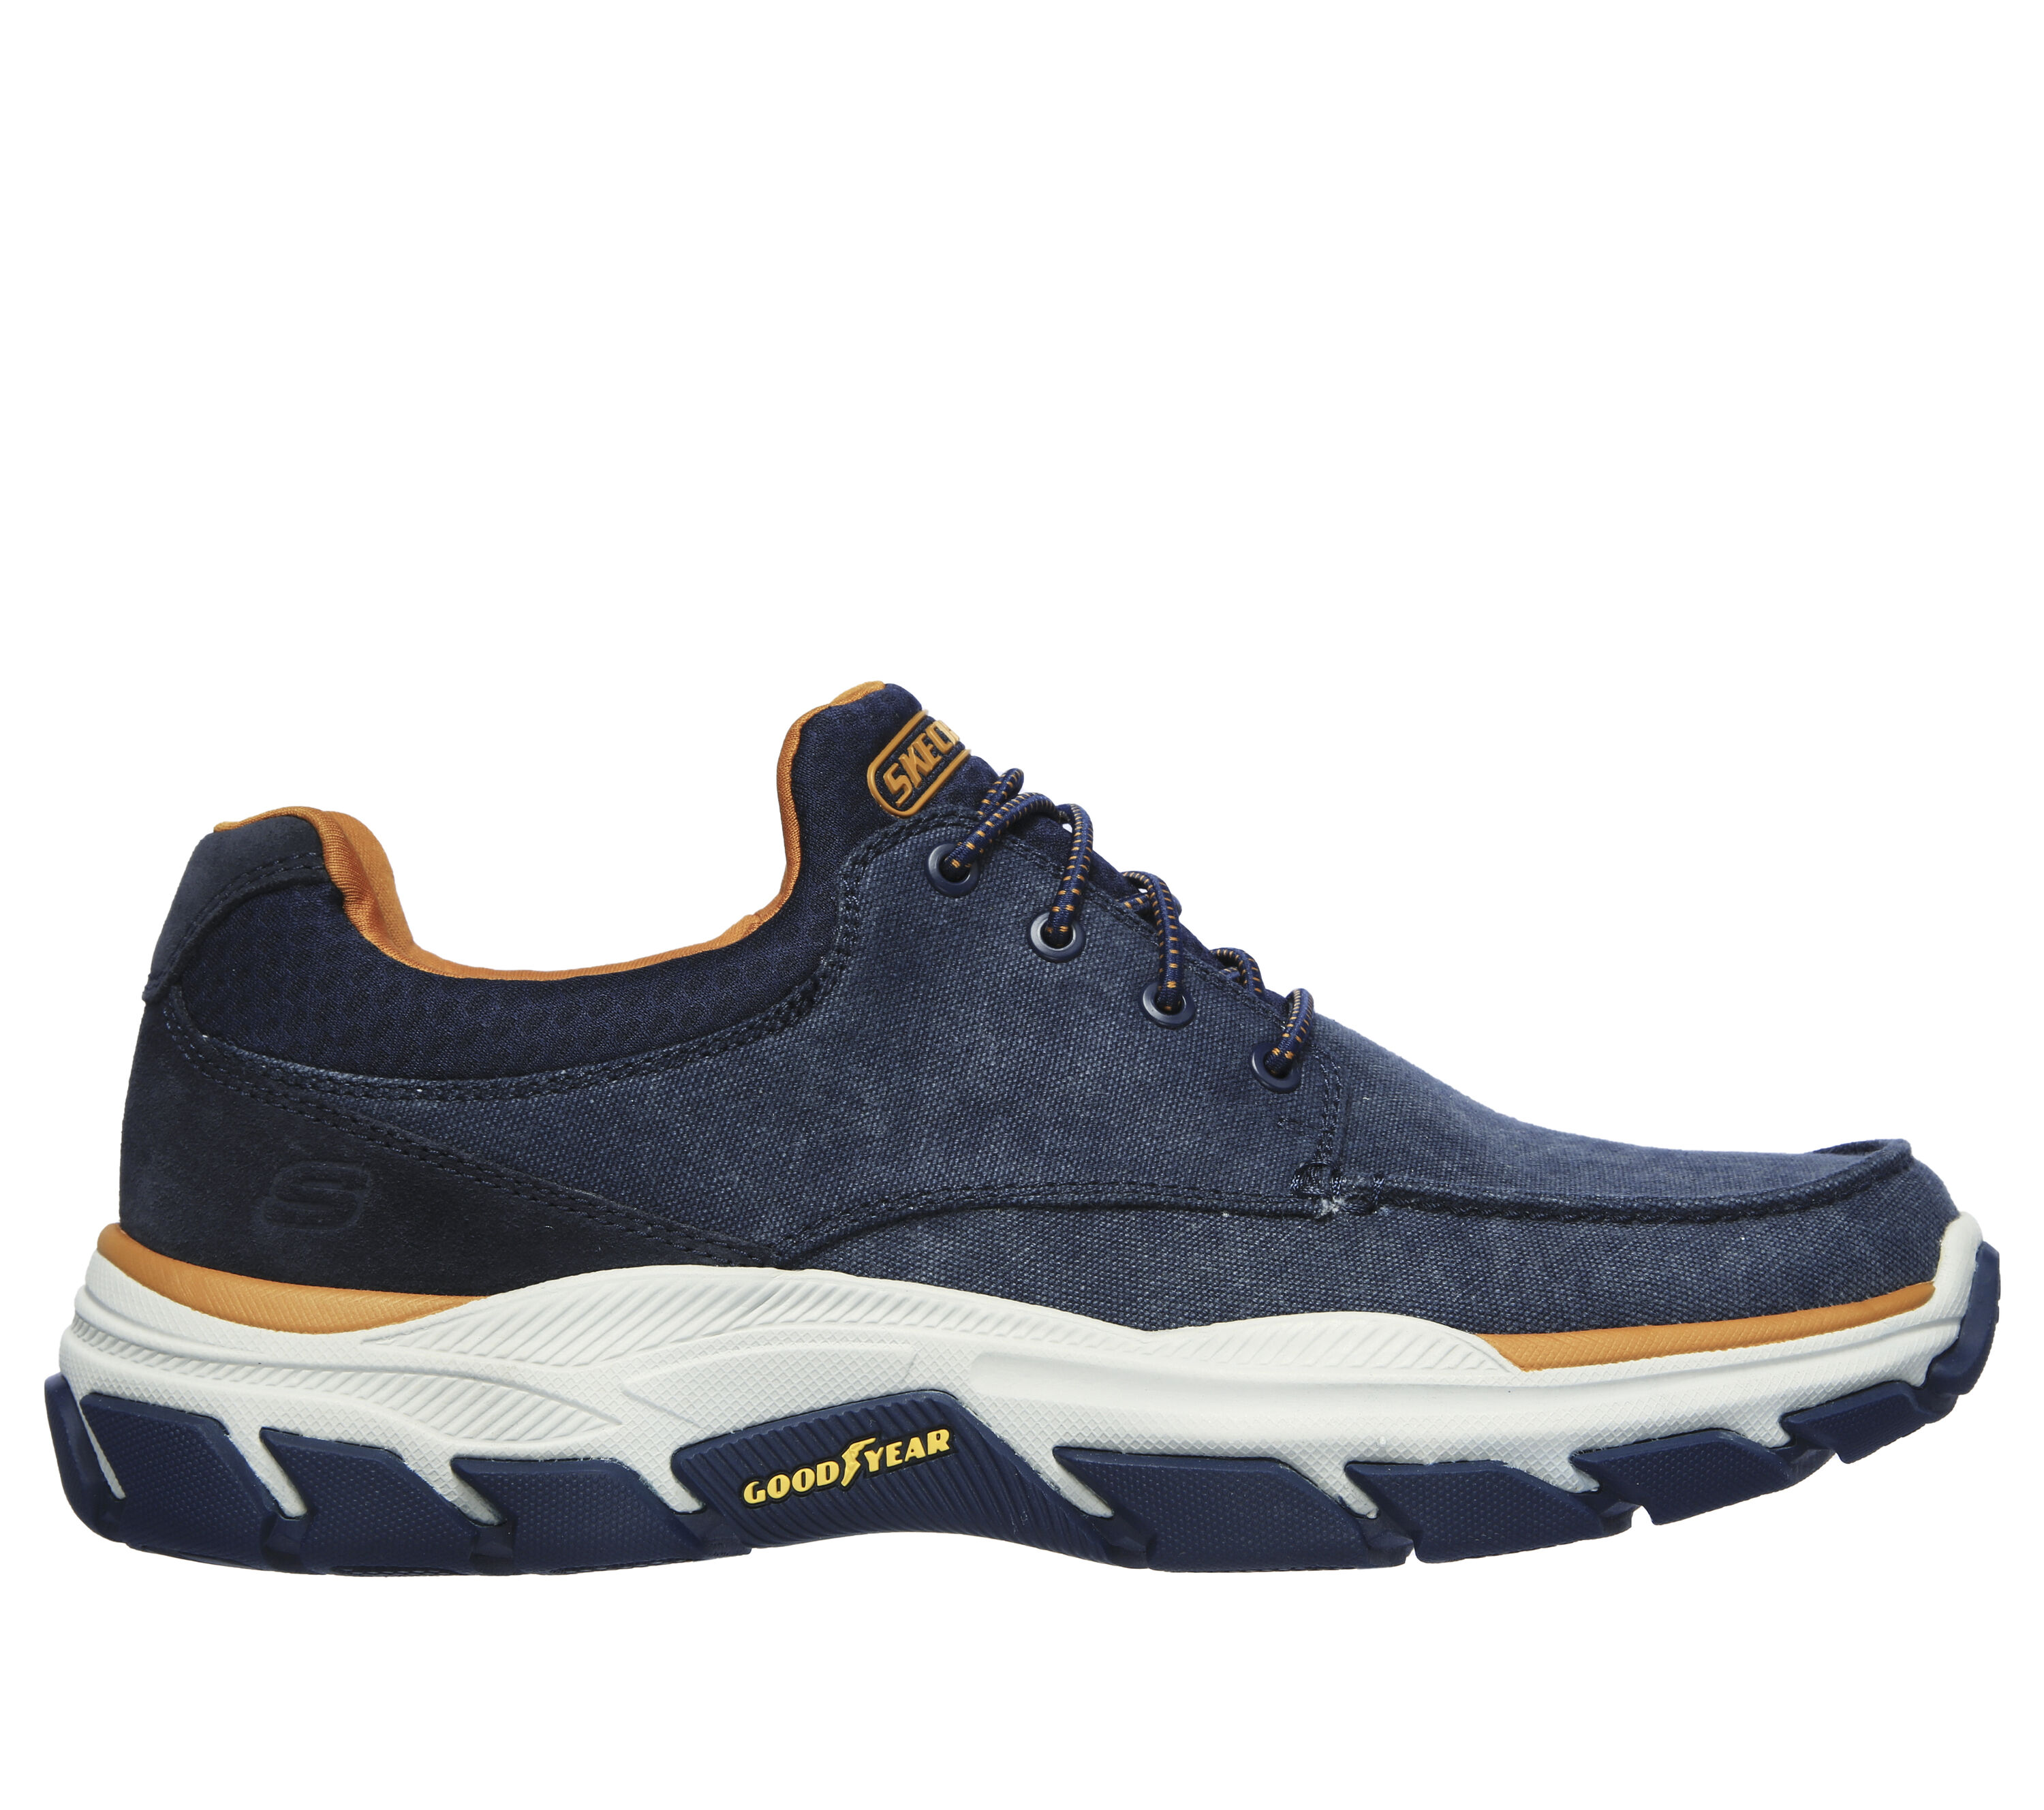 Shop the Relaxed Fit: Respected - Loleto | SKECHERS